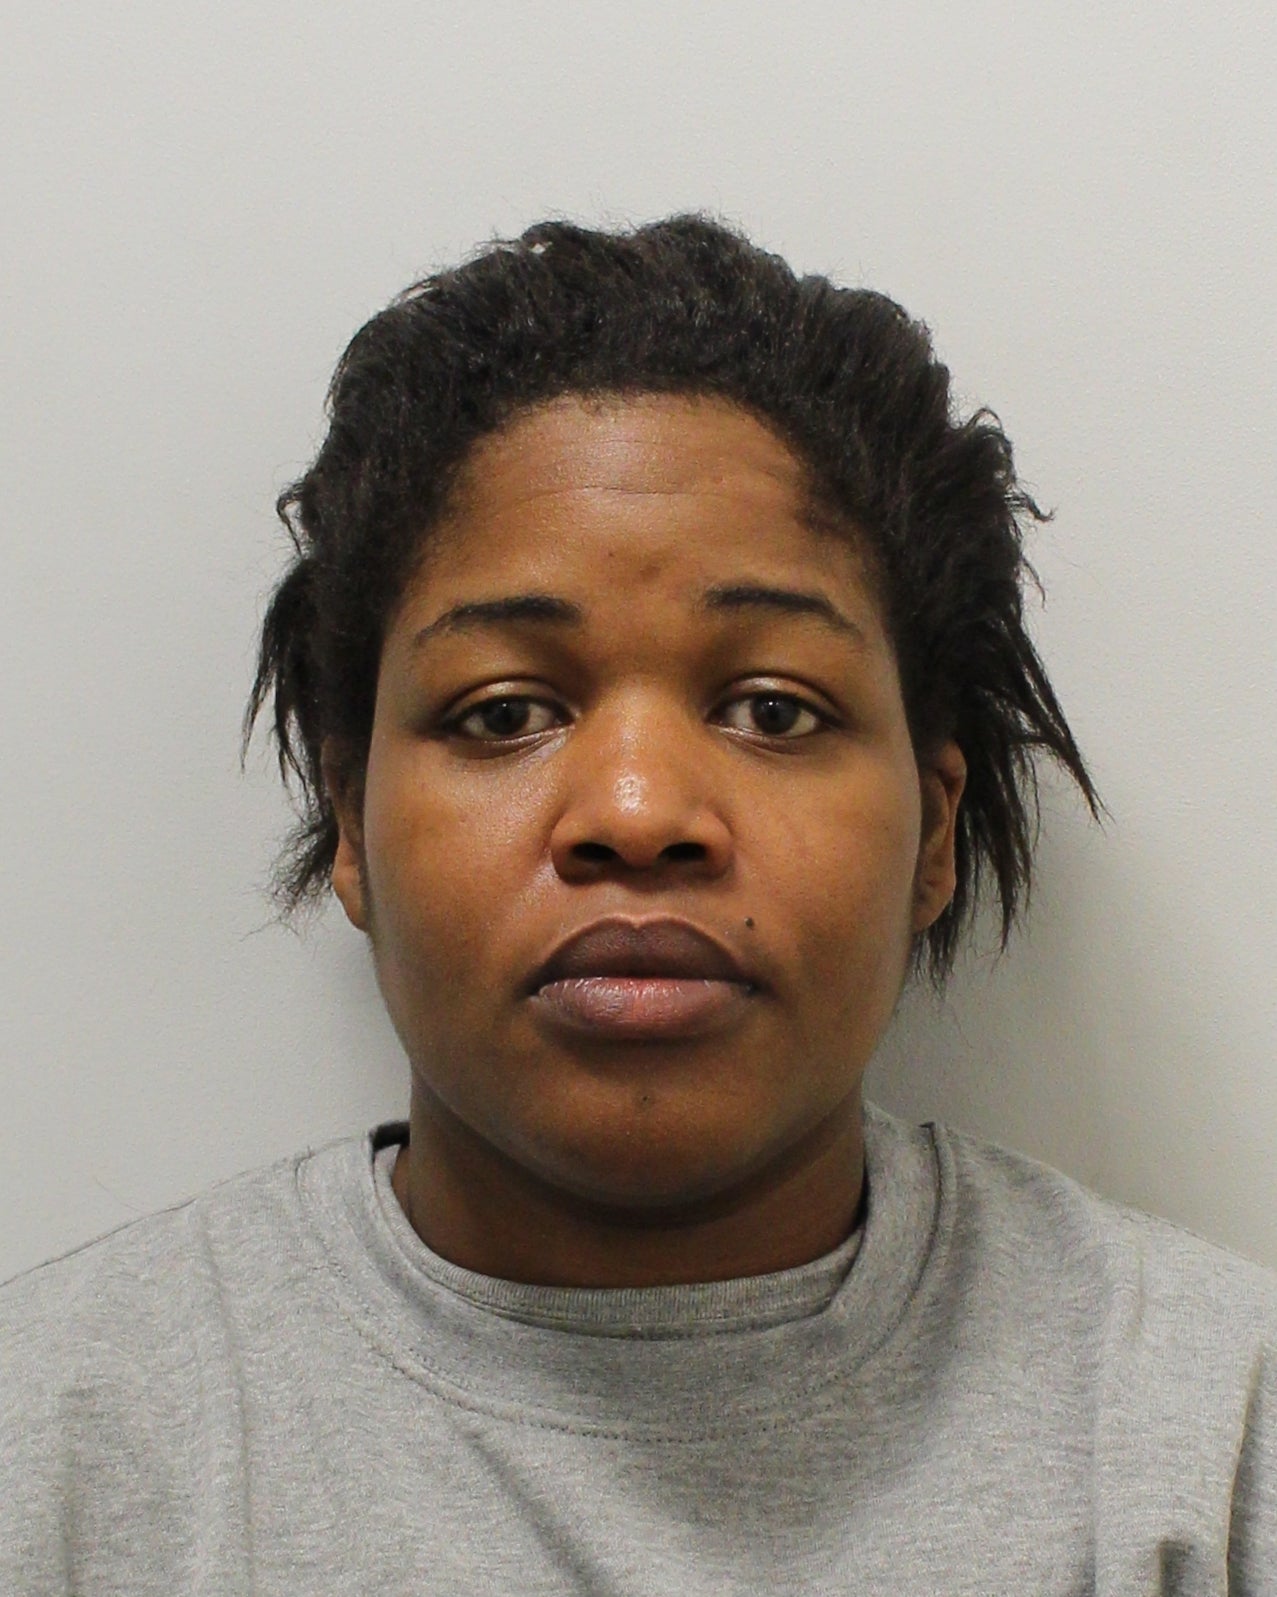 Chelsea Grant was jailed for a minimum 15 years